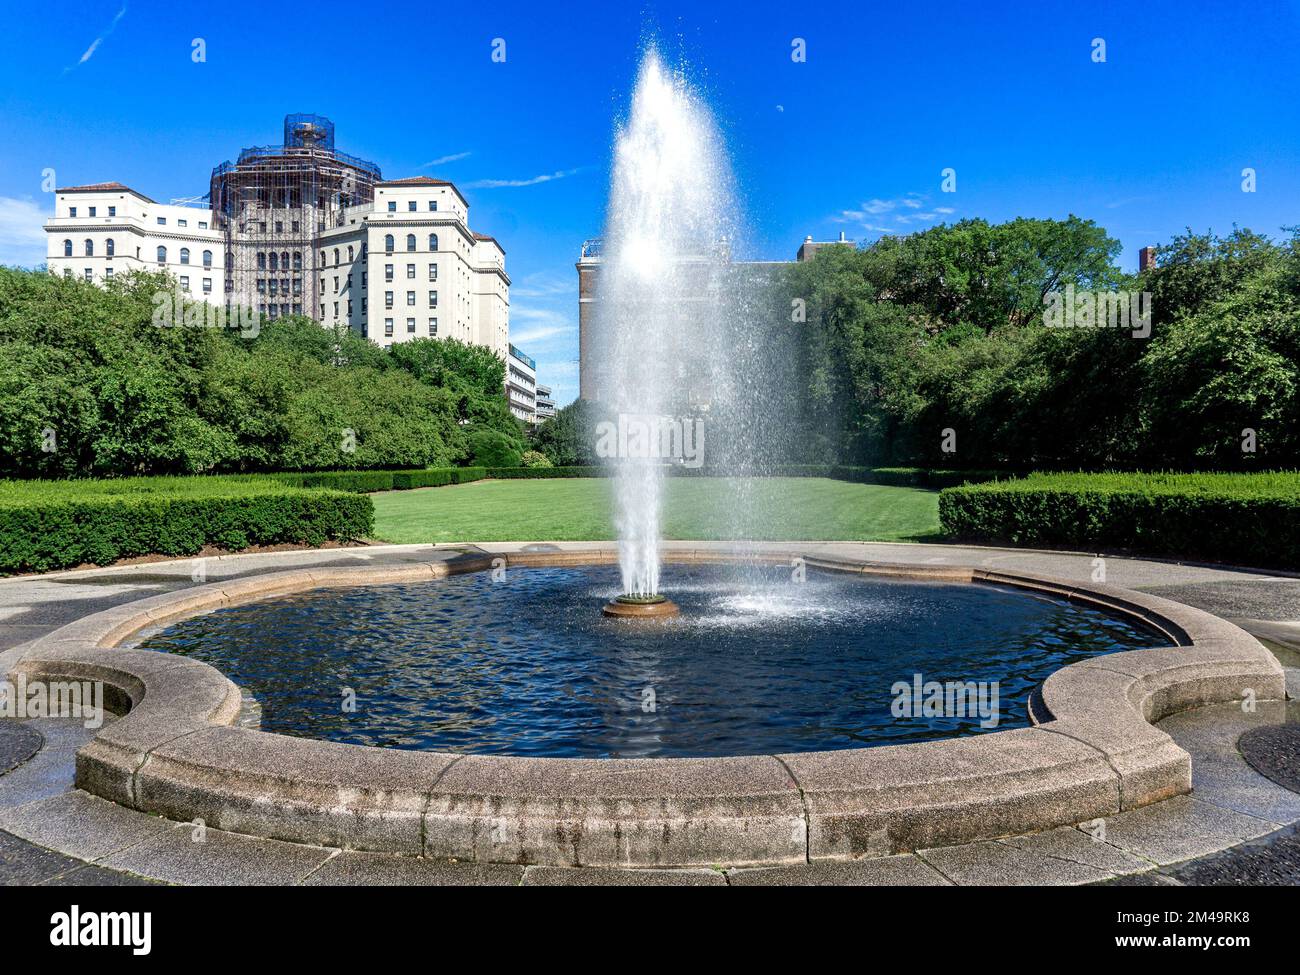 New York, NY - USA - July 20, 2018 View of Conservatory Garden's single central fountain jet in front of the symmetrical lawn, part of the formal gard Stock Photo